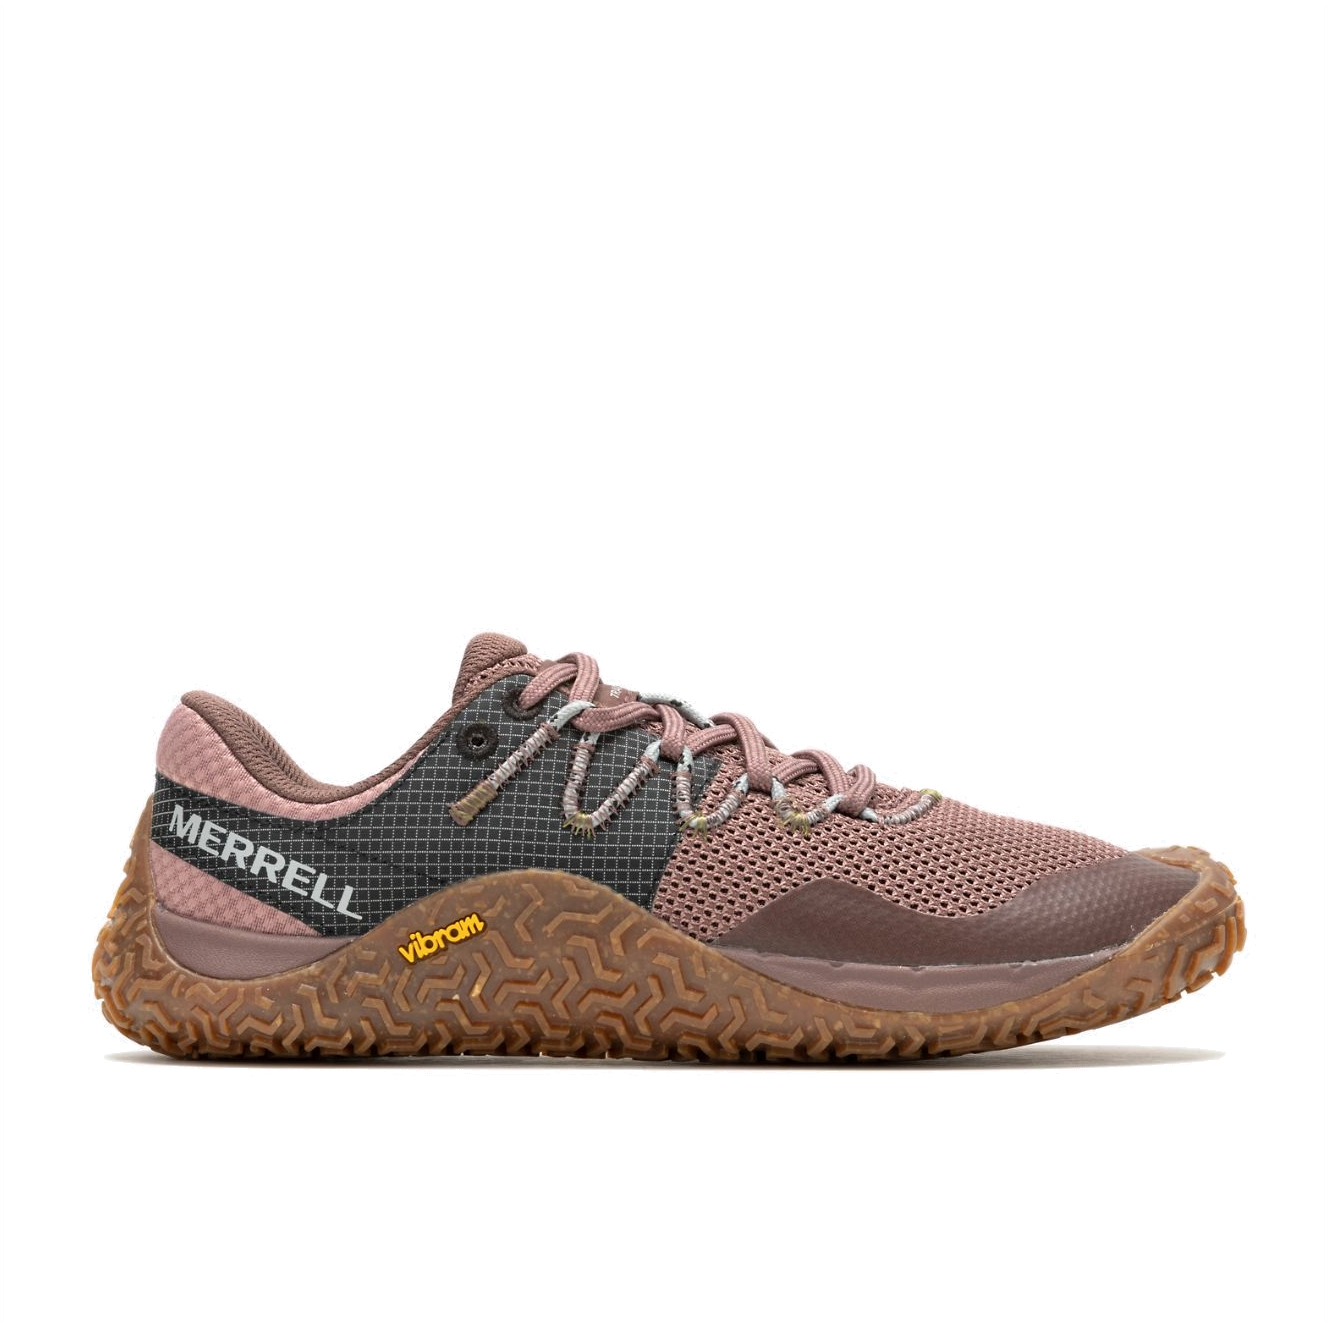 Picture of Merrell Trail Glove 7 Barefoot Shoes Women - burlwood